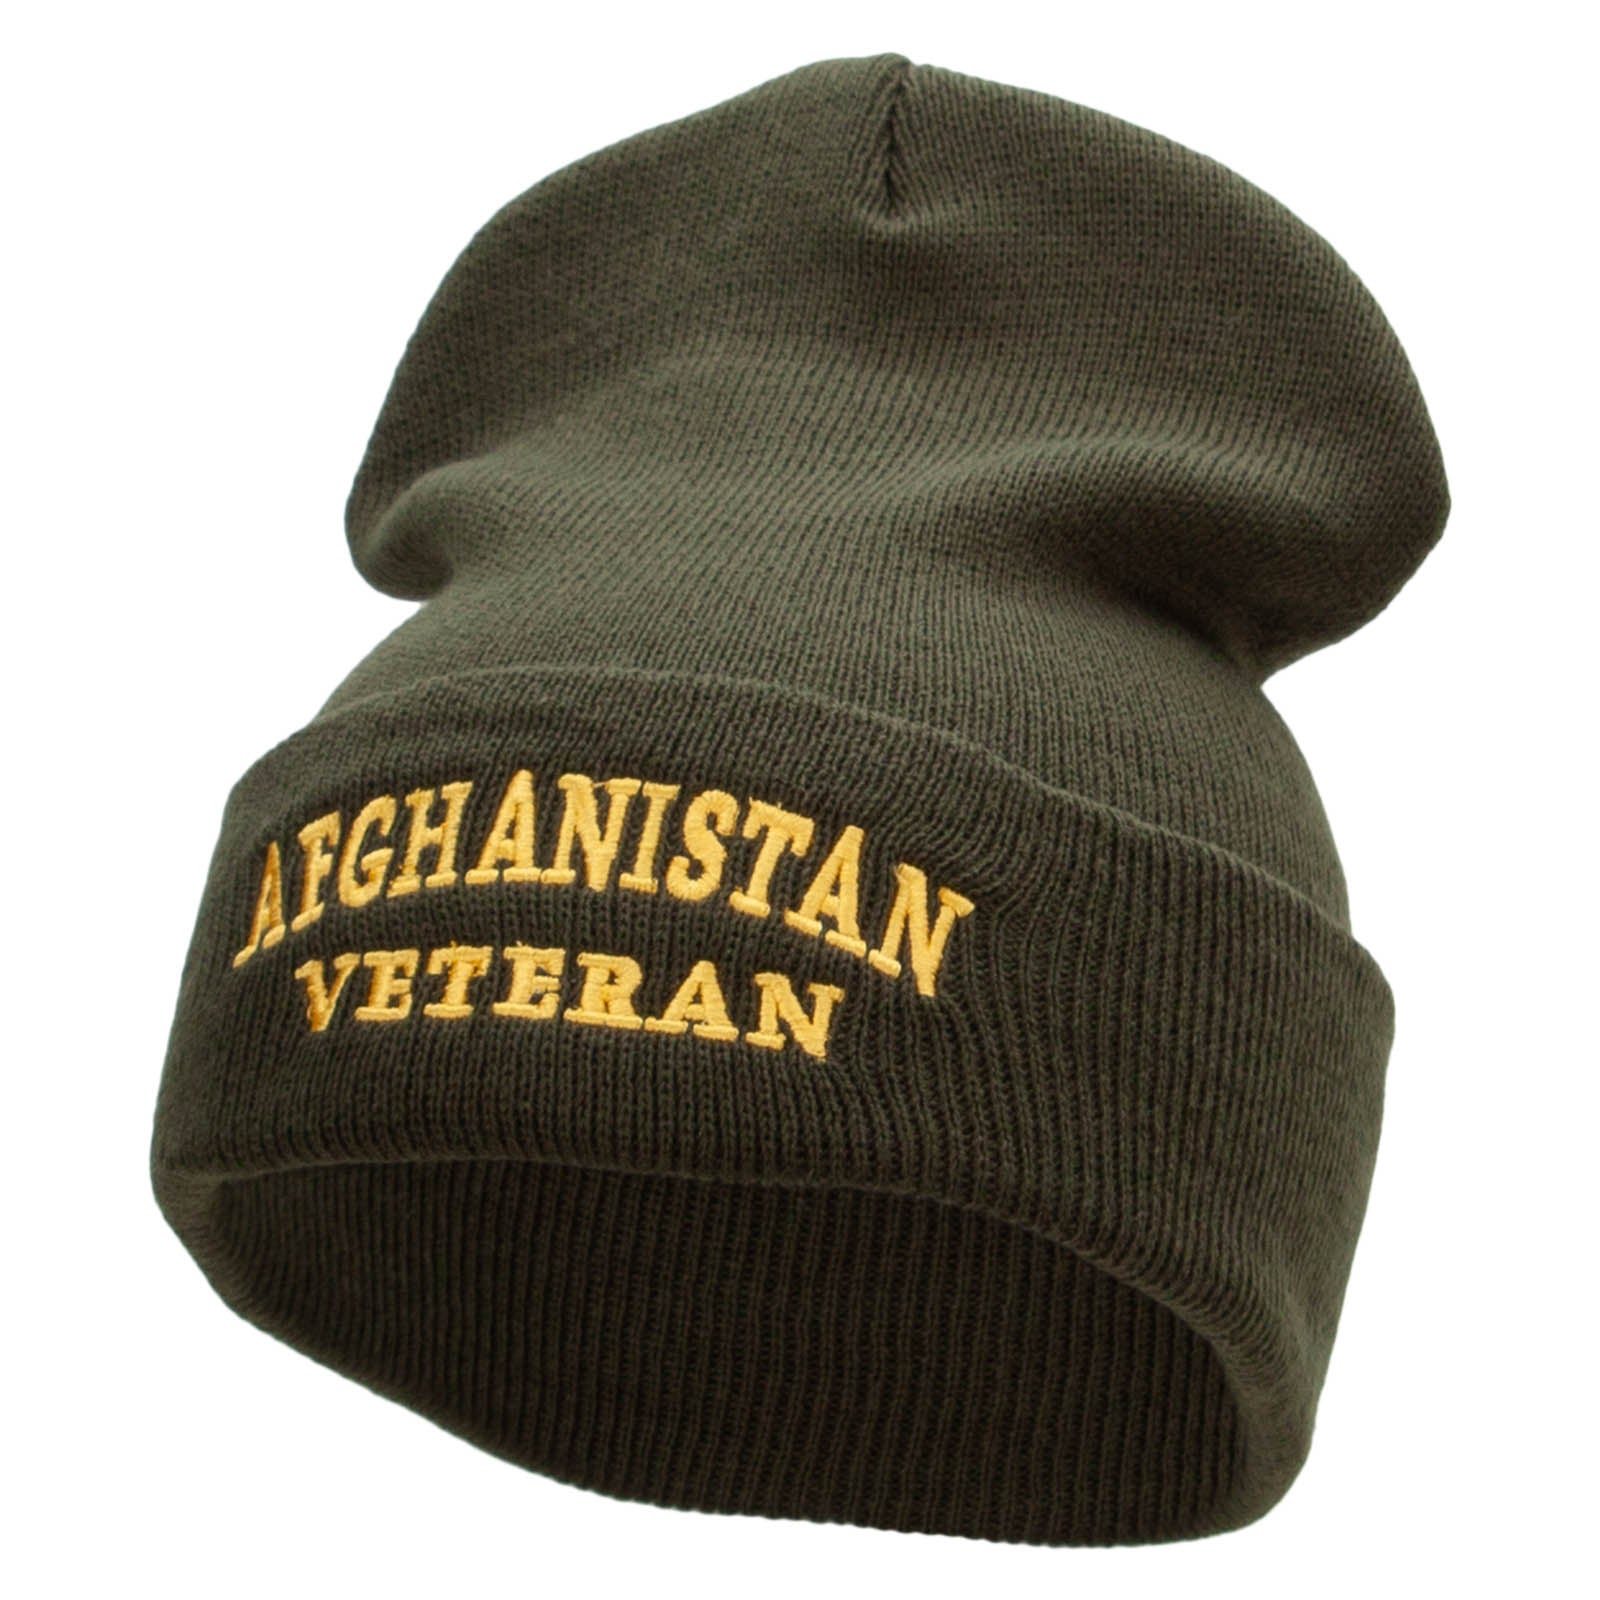 Afghanistan Vet Embroidered 12 Inch Solid Long Beanie Made in USA - Olive OSFM